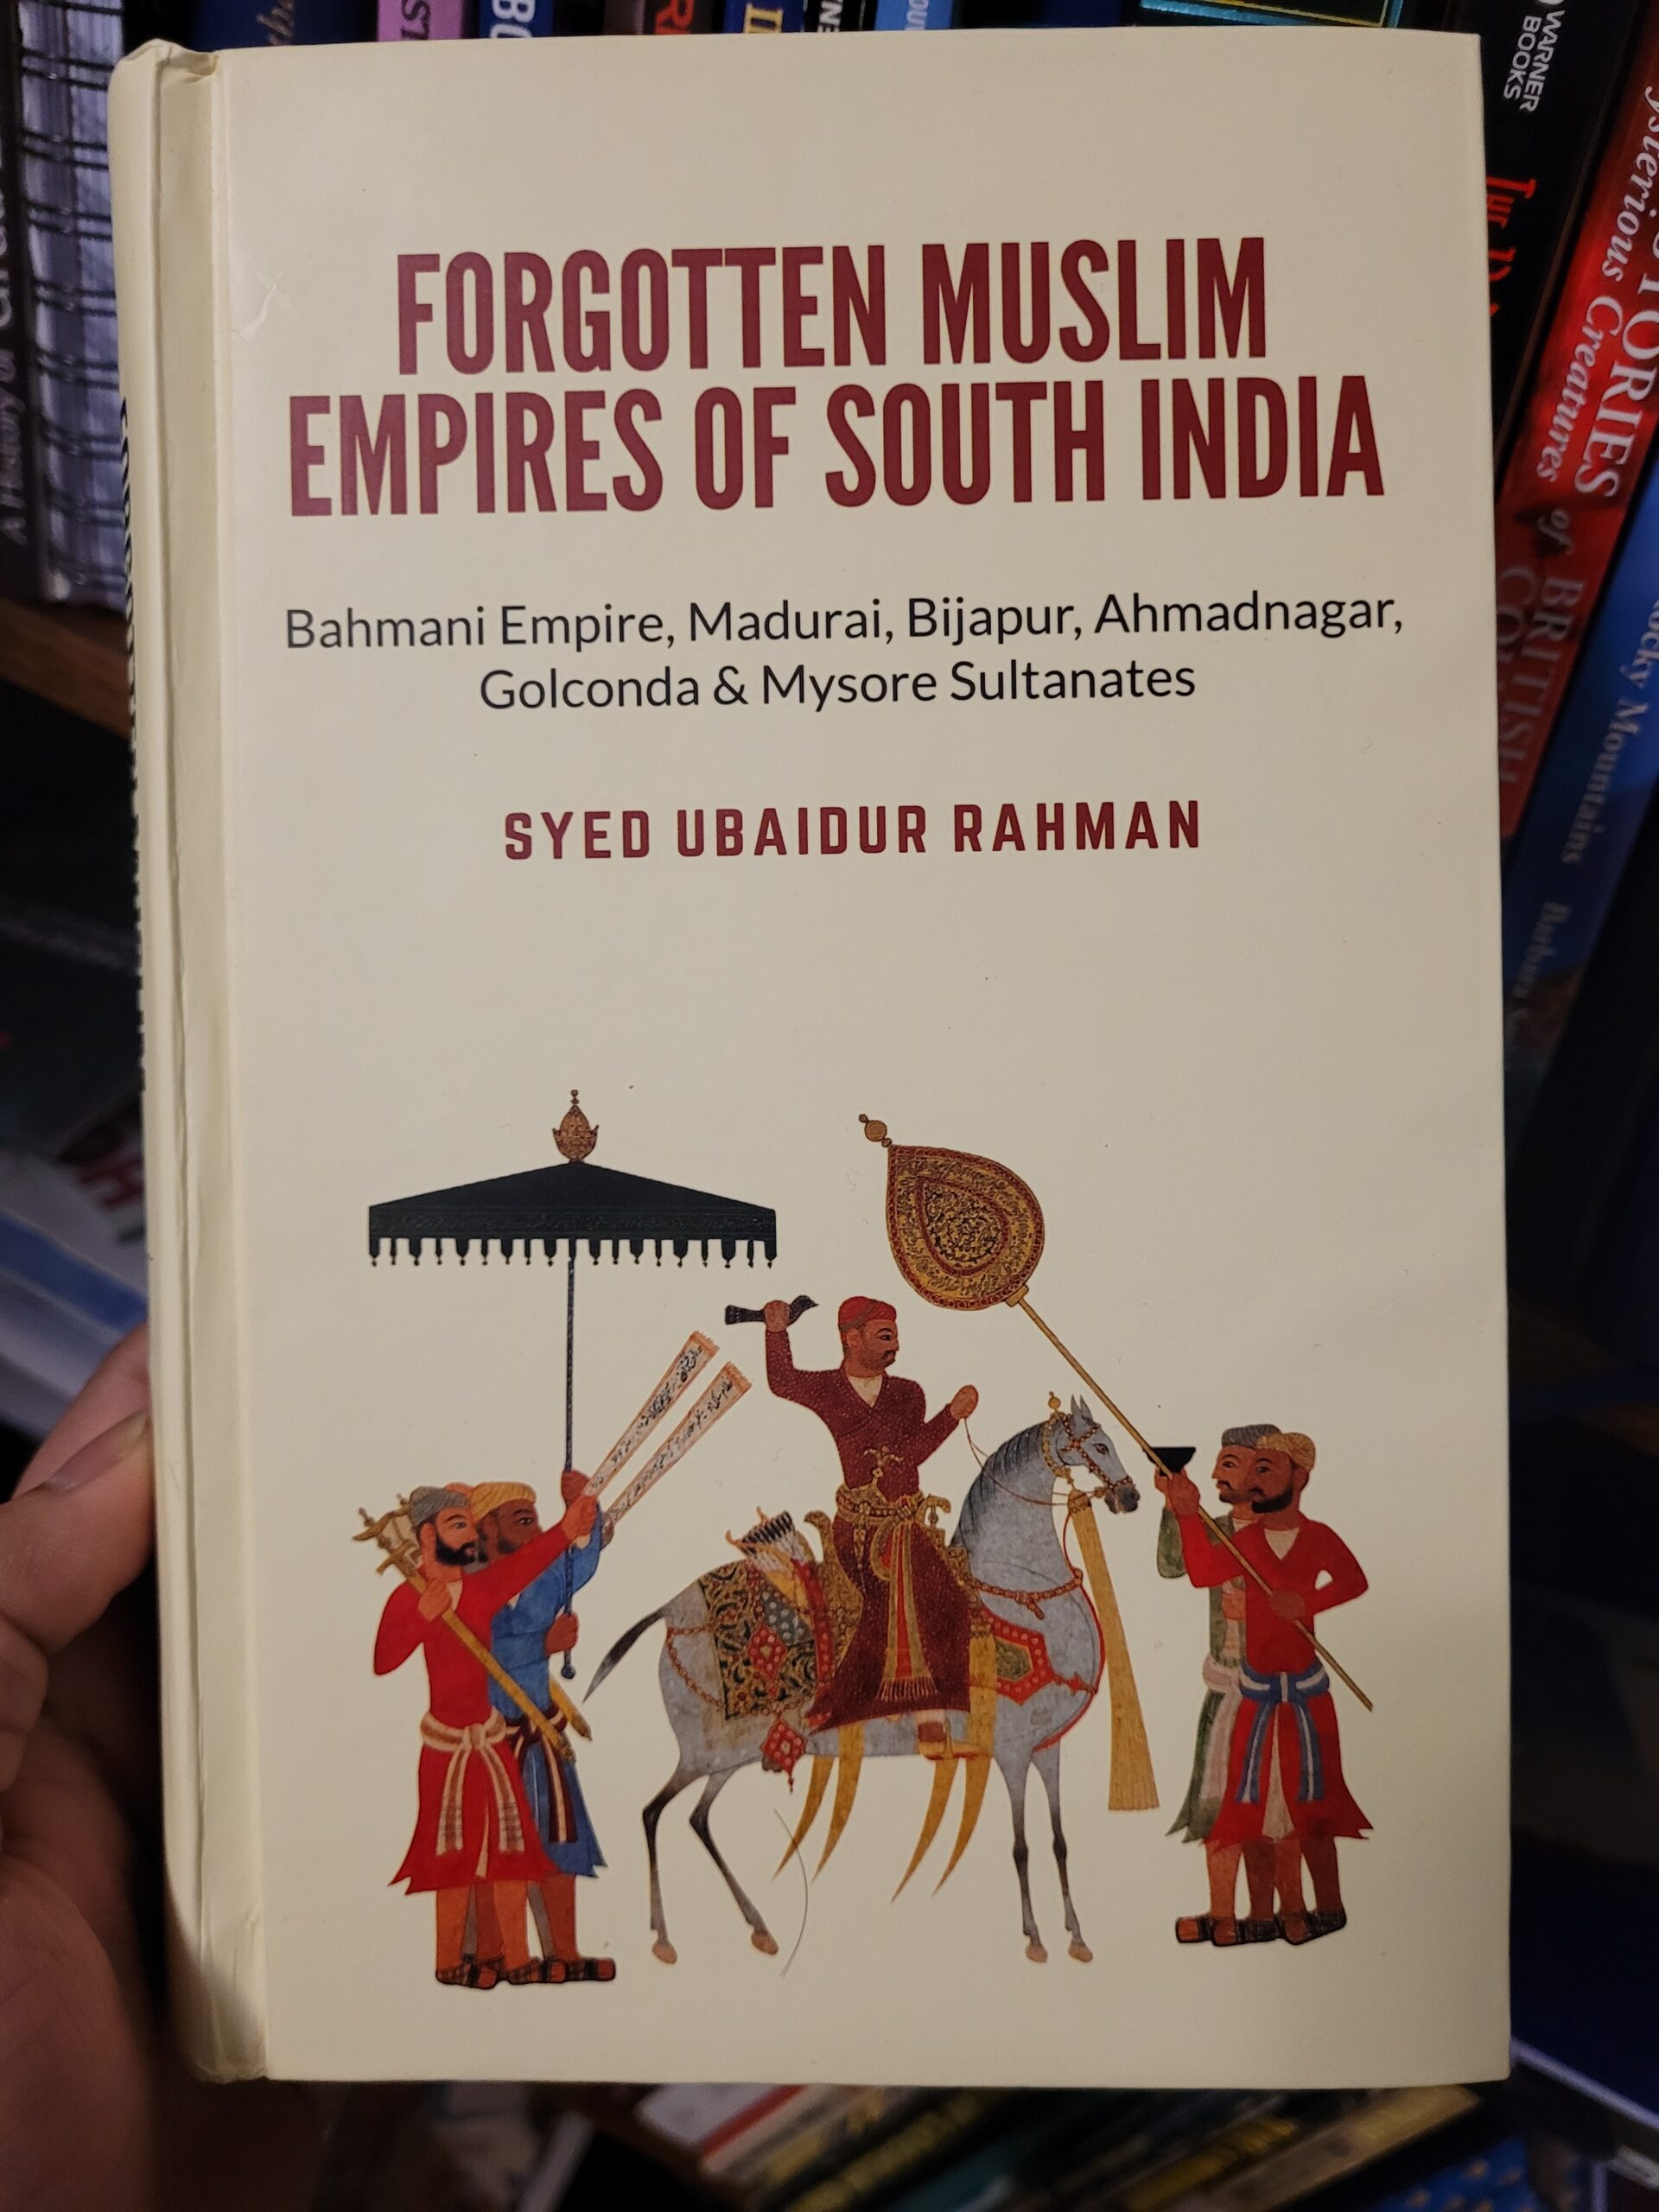 Forgotten Muslim Empires of South India by Syed Ubaidur Rahman || A 10 point book review